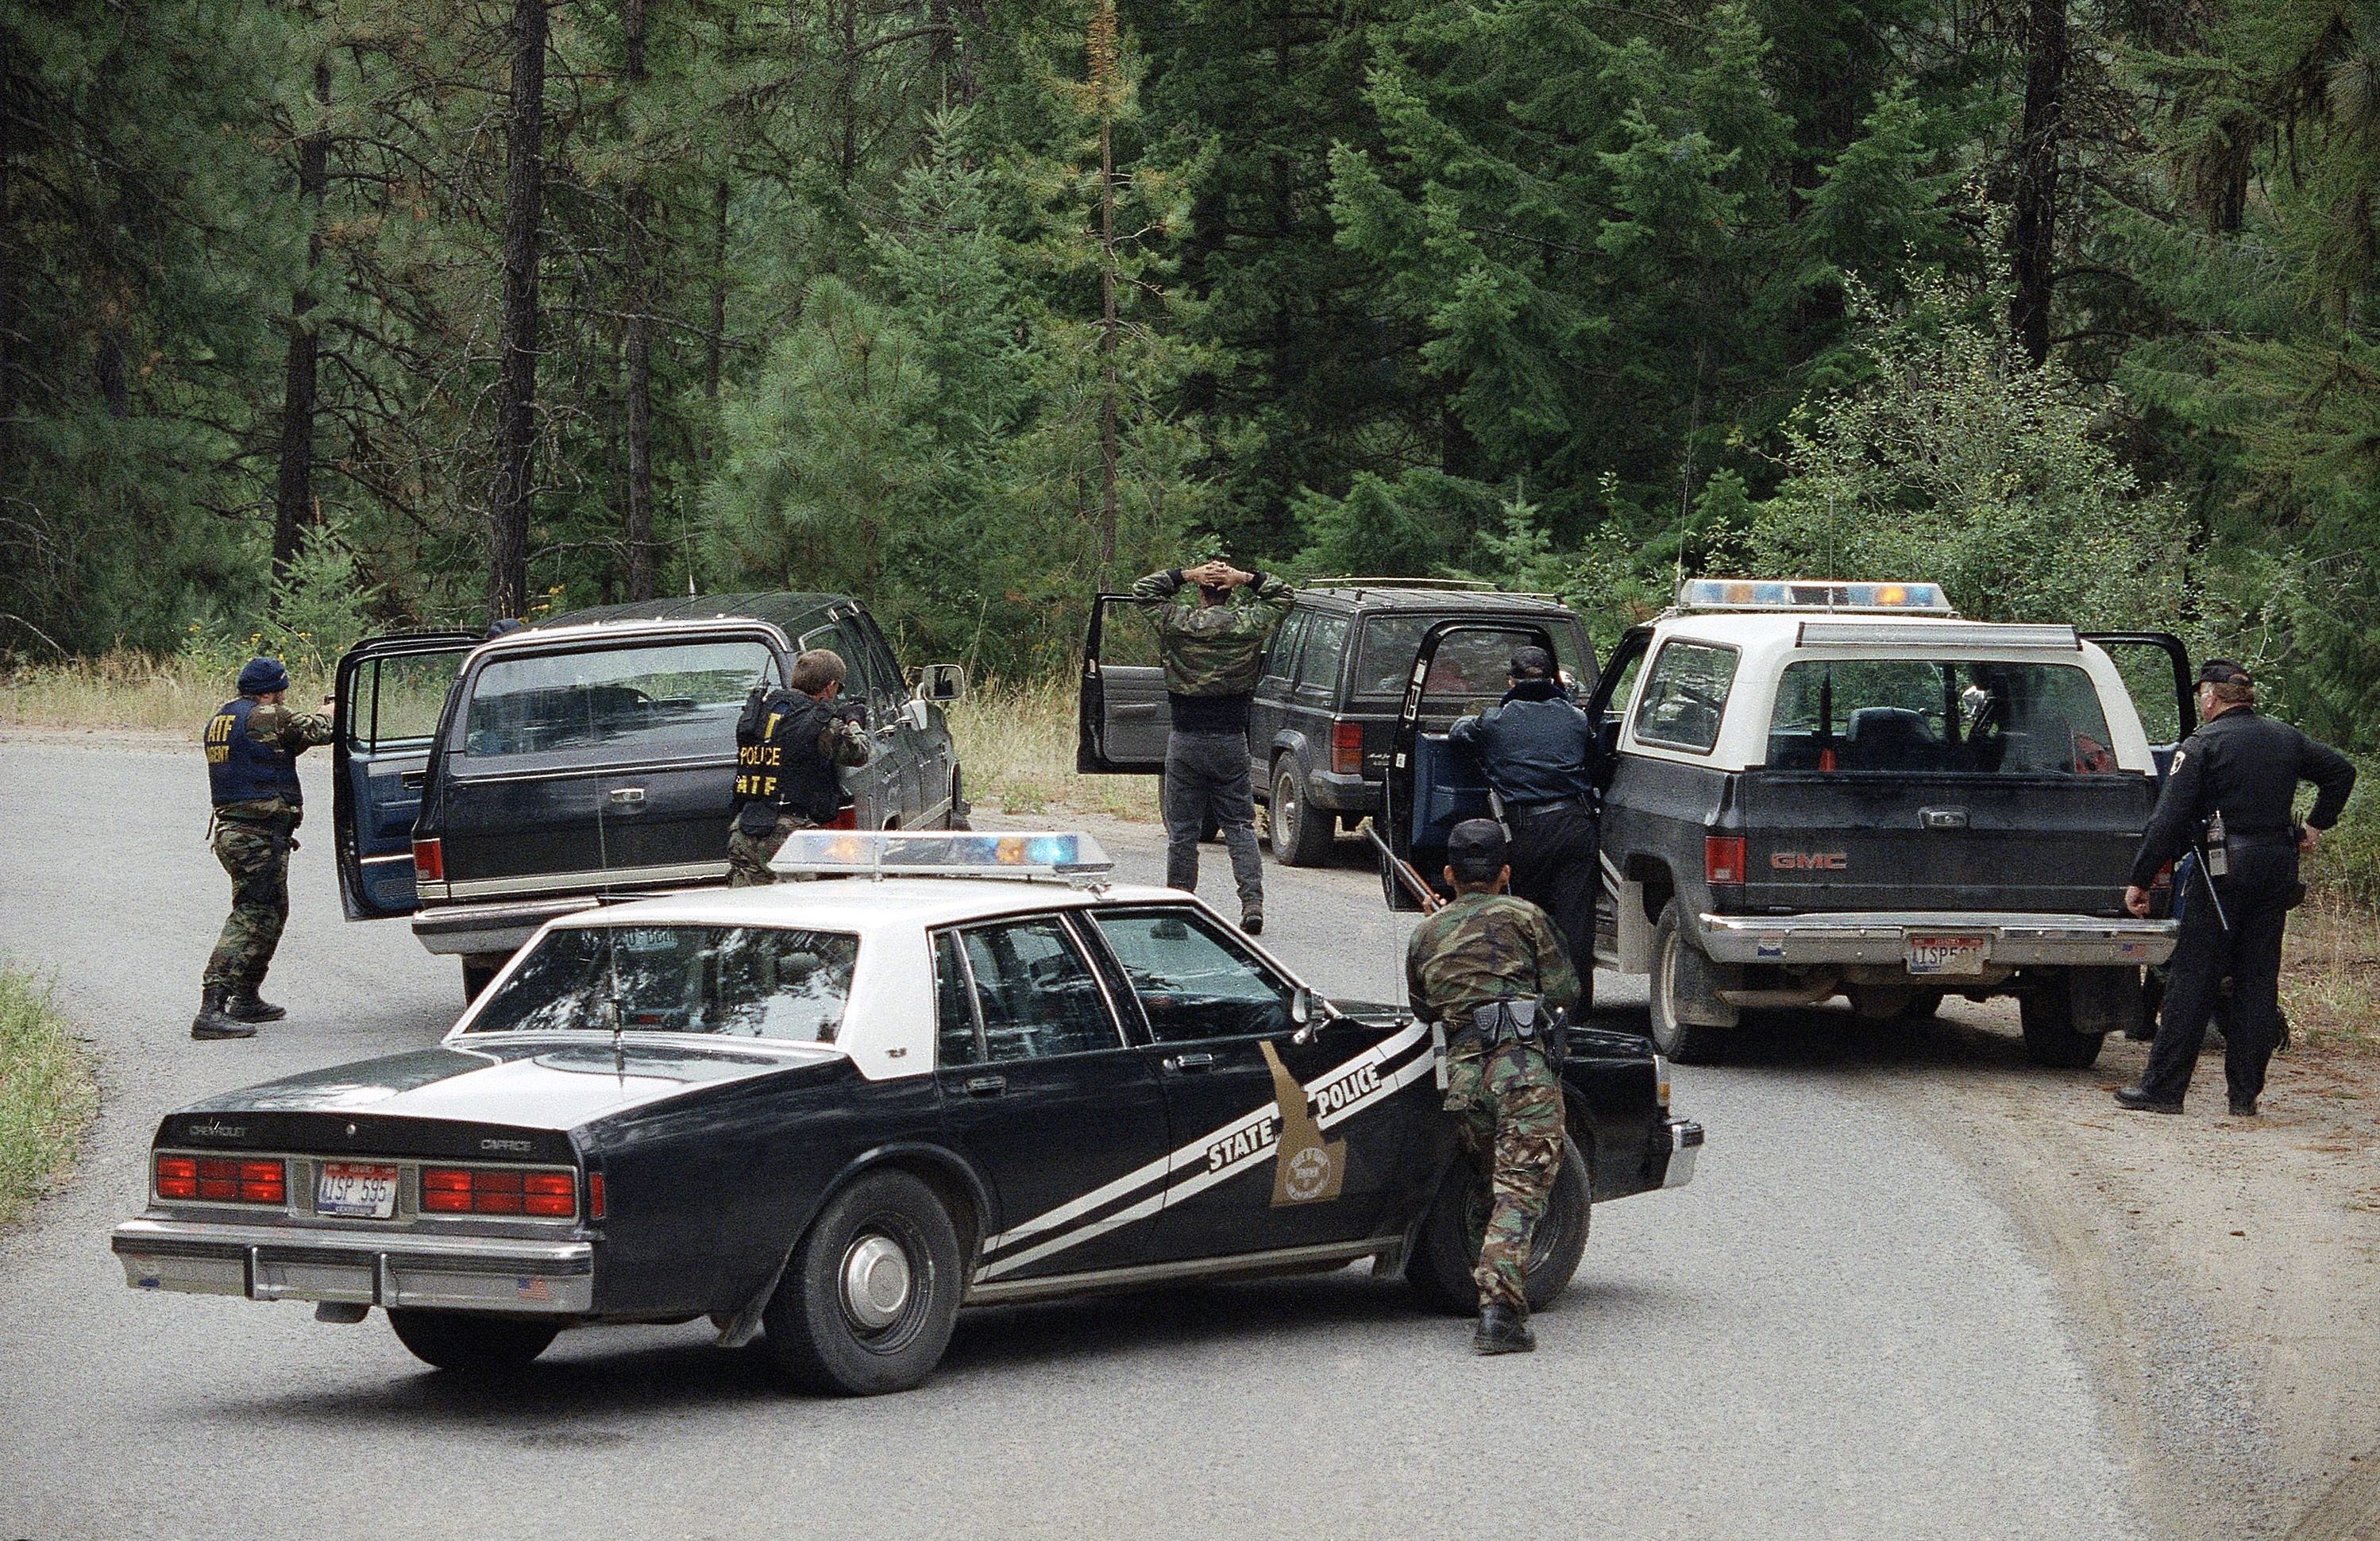 We are very sorry': The bloody standoff at Ruby Ridge in 1992 that left 3 people dead - pennlive.com